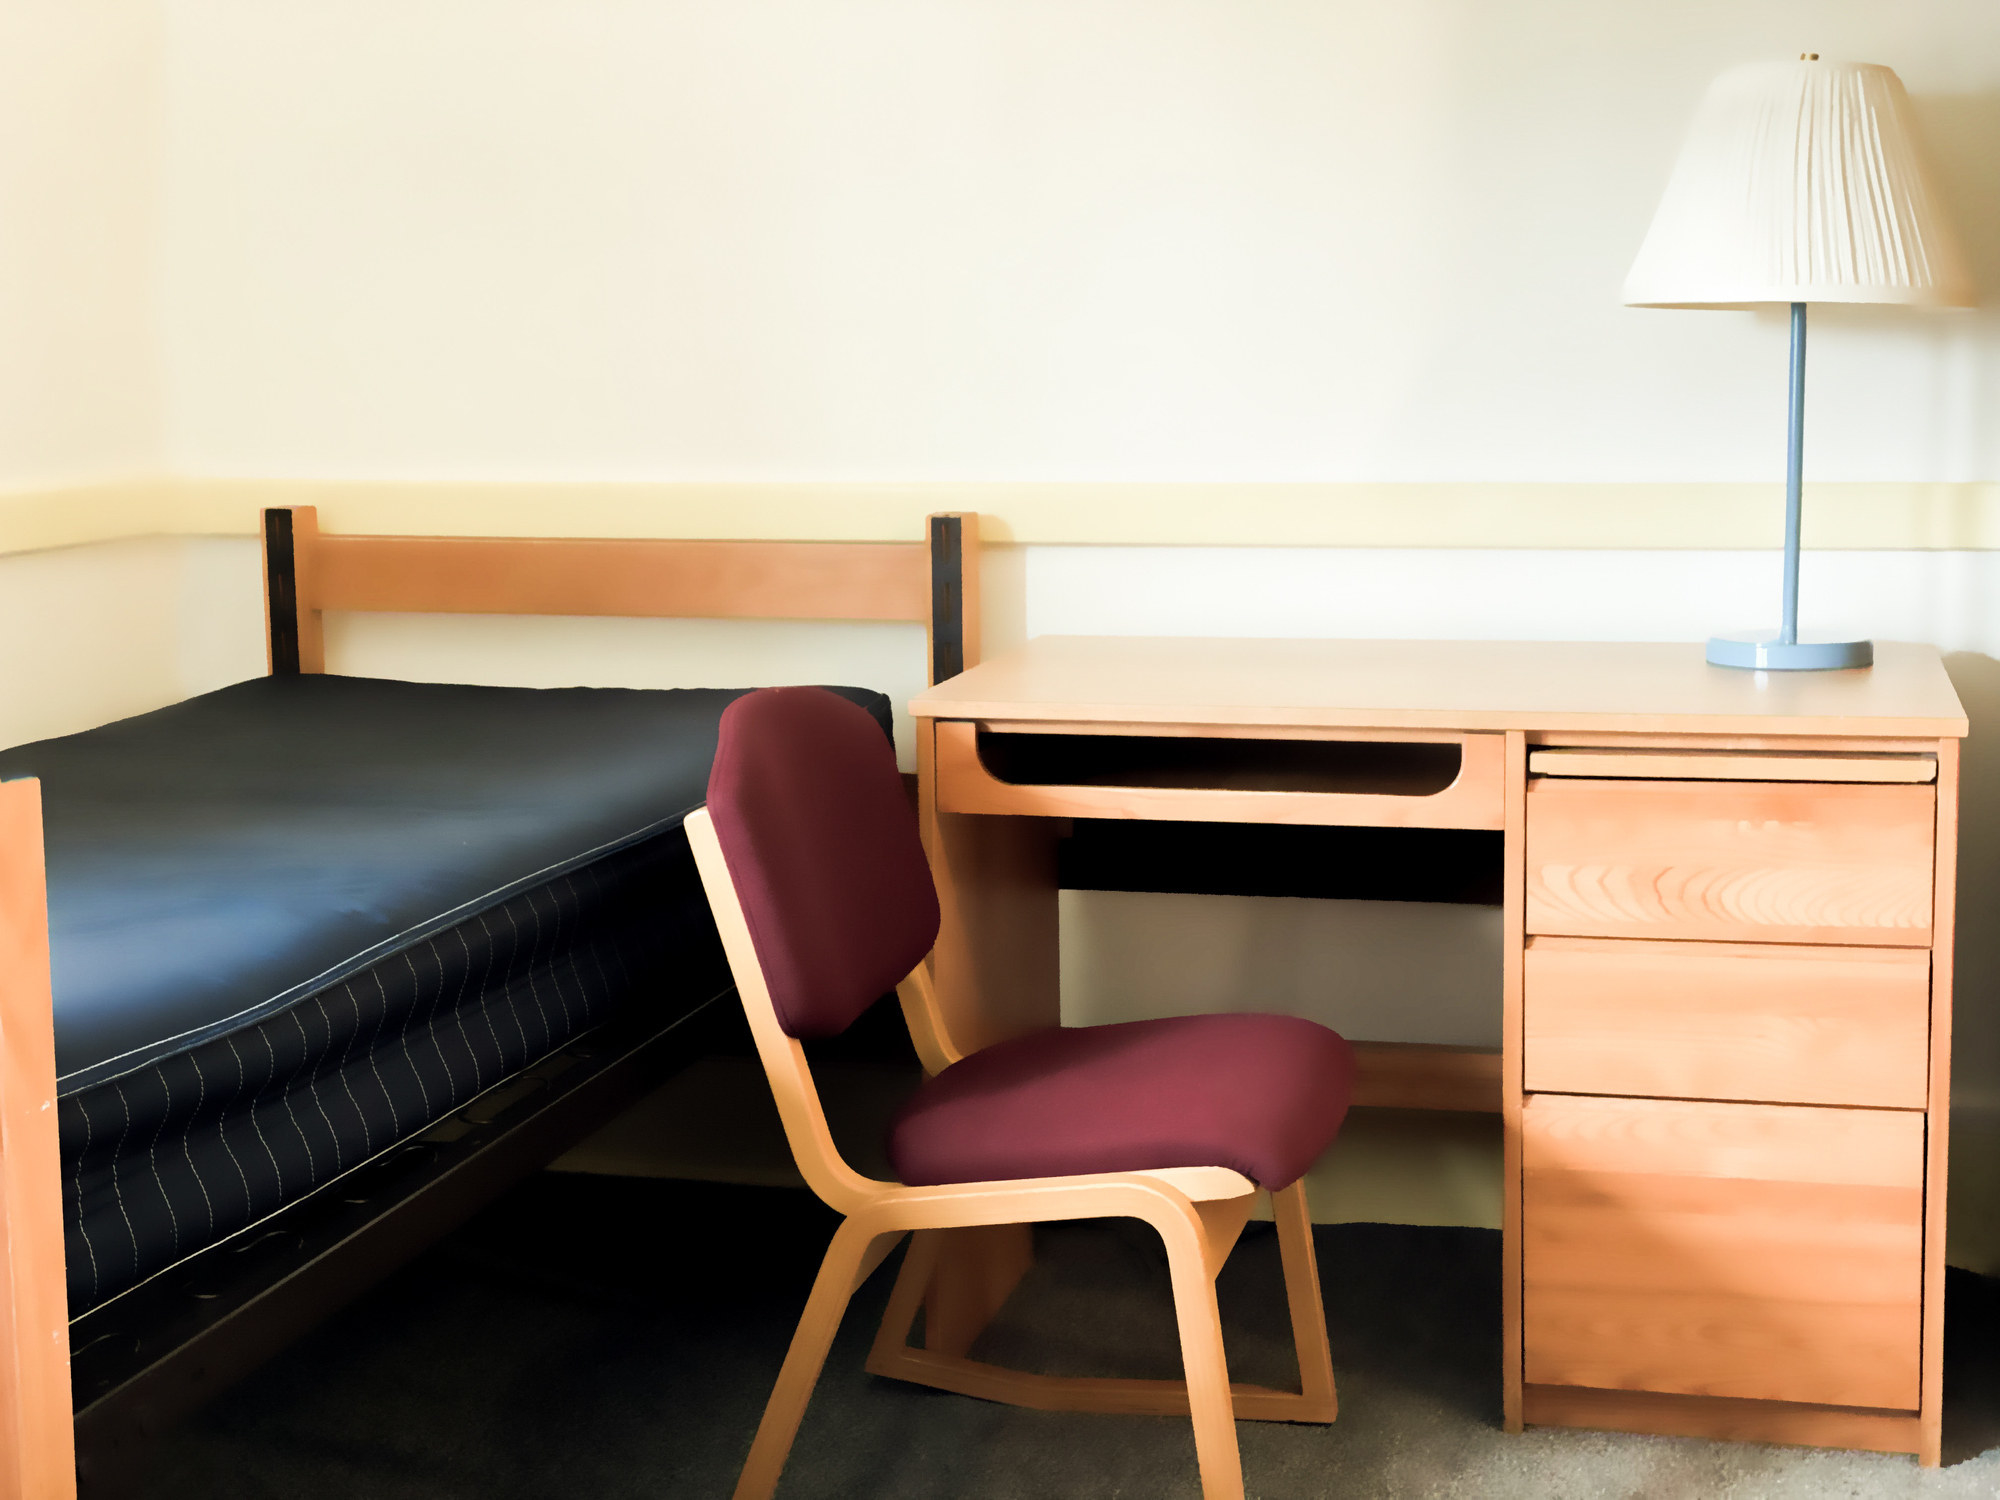 A bed sits in a student dormitory with a chair beside it near a desk with a lamp on top of the desk